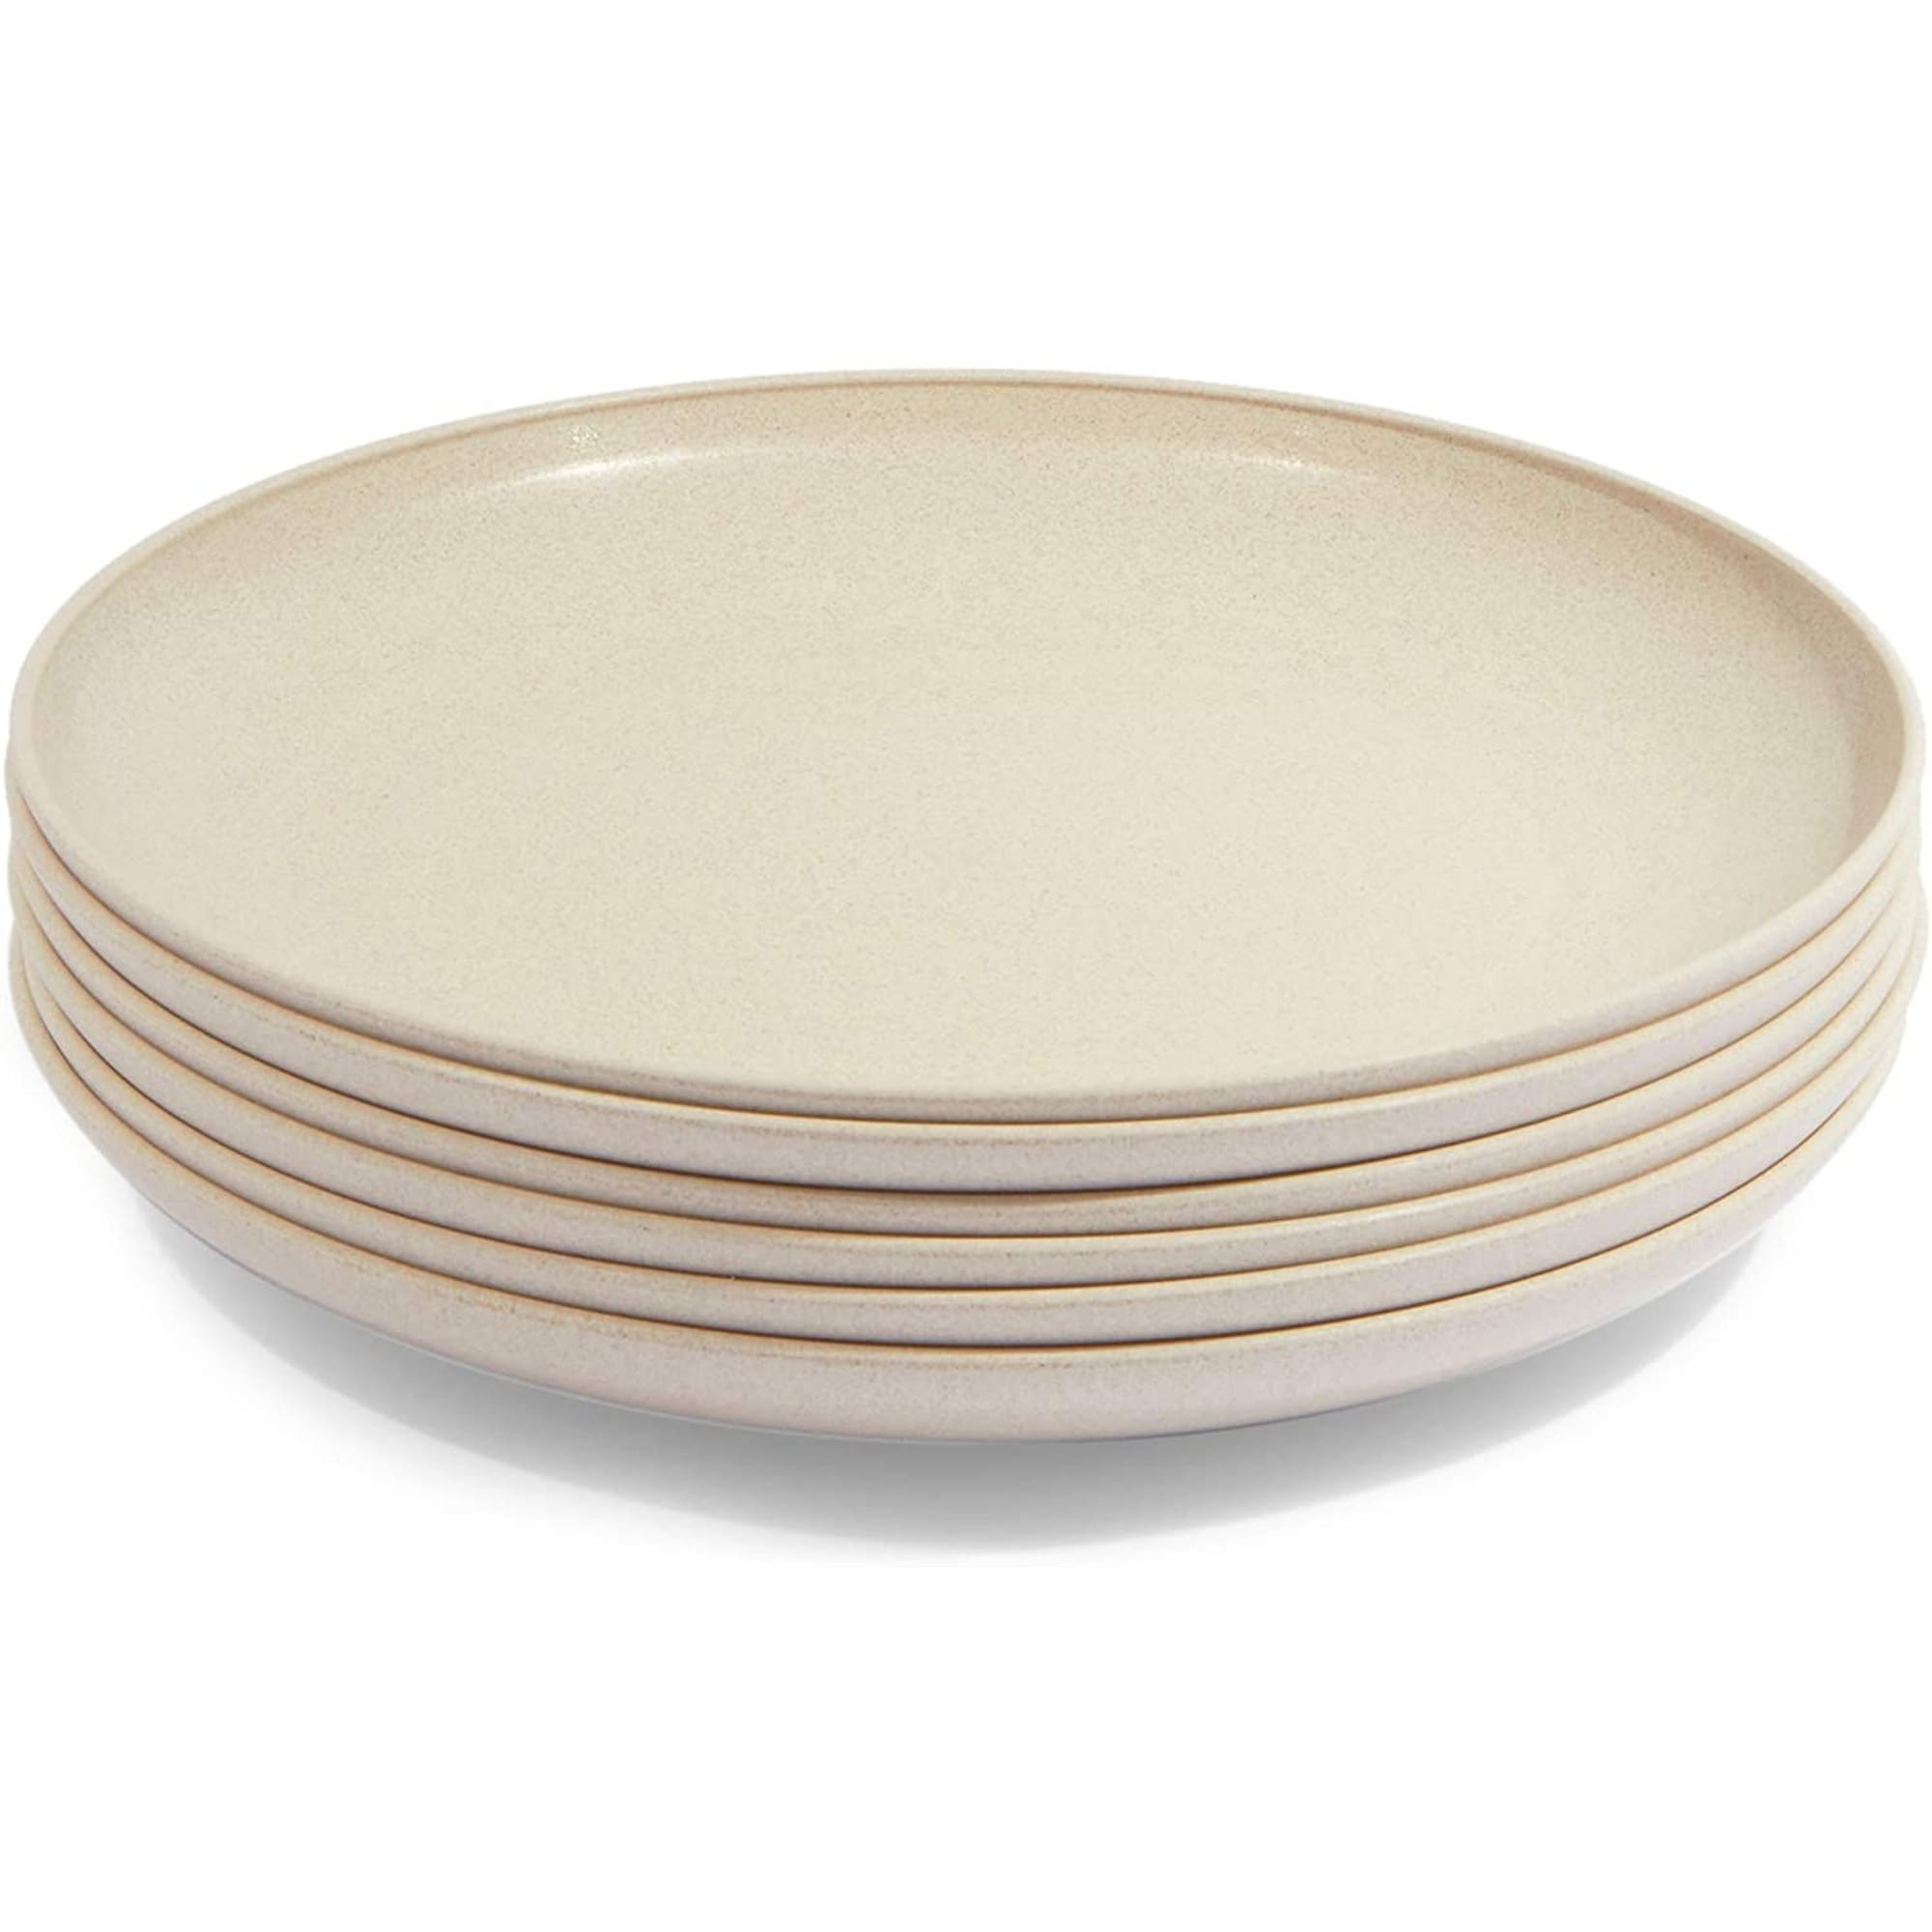 https://ak1.ostkcdn.com/images/products/is/images/direct/363ffb3e3fdc75d899deae3355df0847a2271666/Wheat-Straw-Plates%2C-Unbreakable-Dinner-Plate-%28Beige%2C-8-In%2C-6-Pack%29.jpg